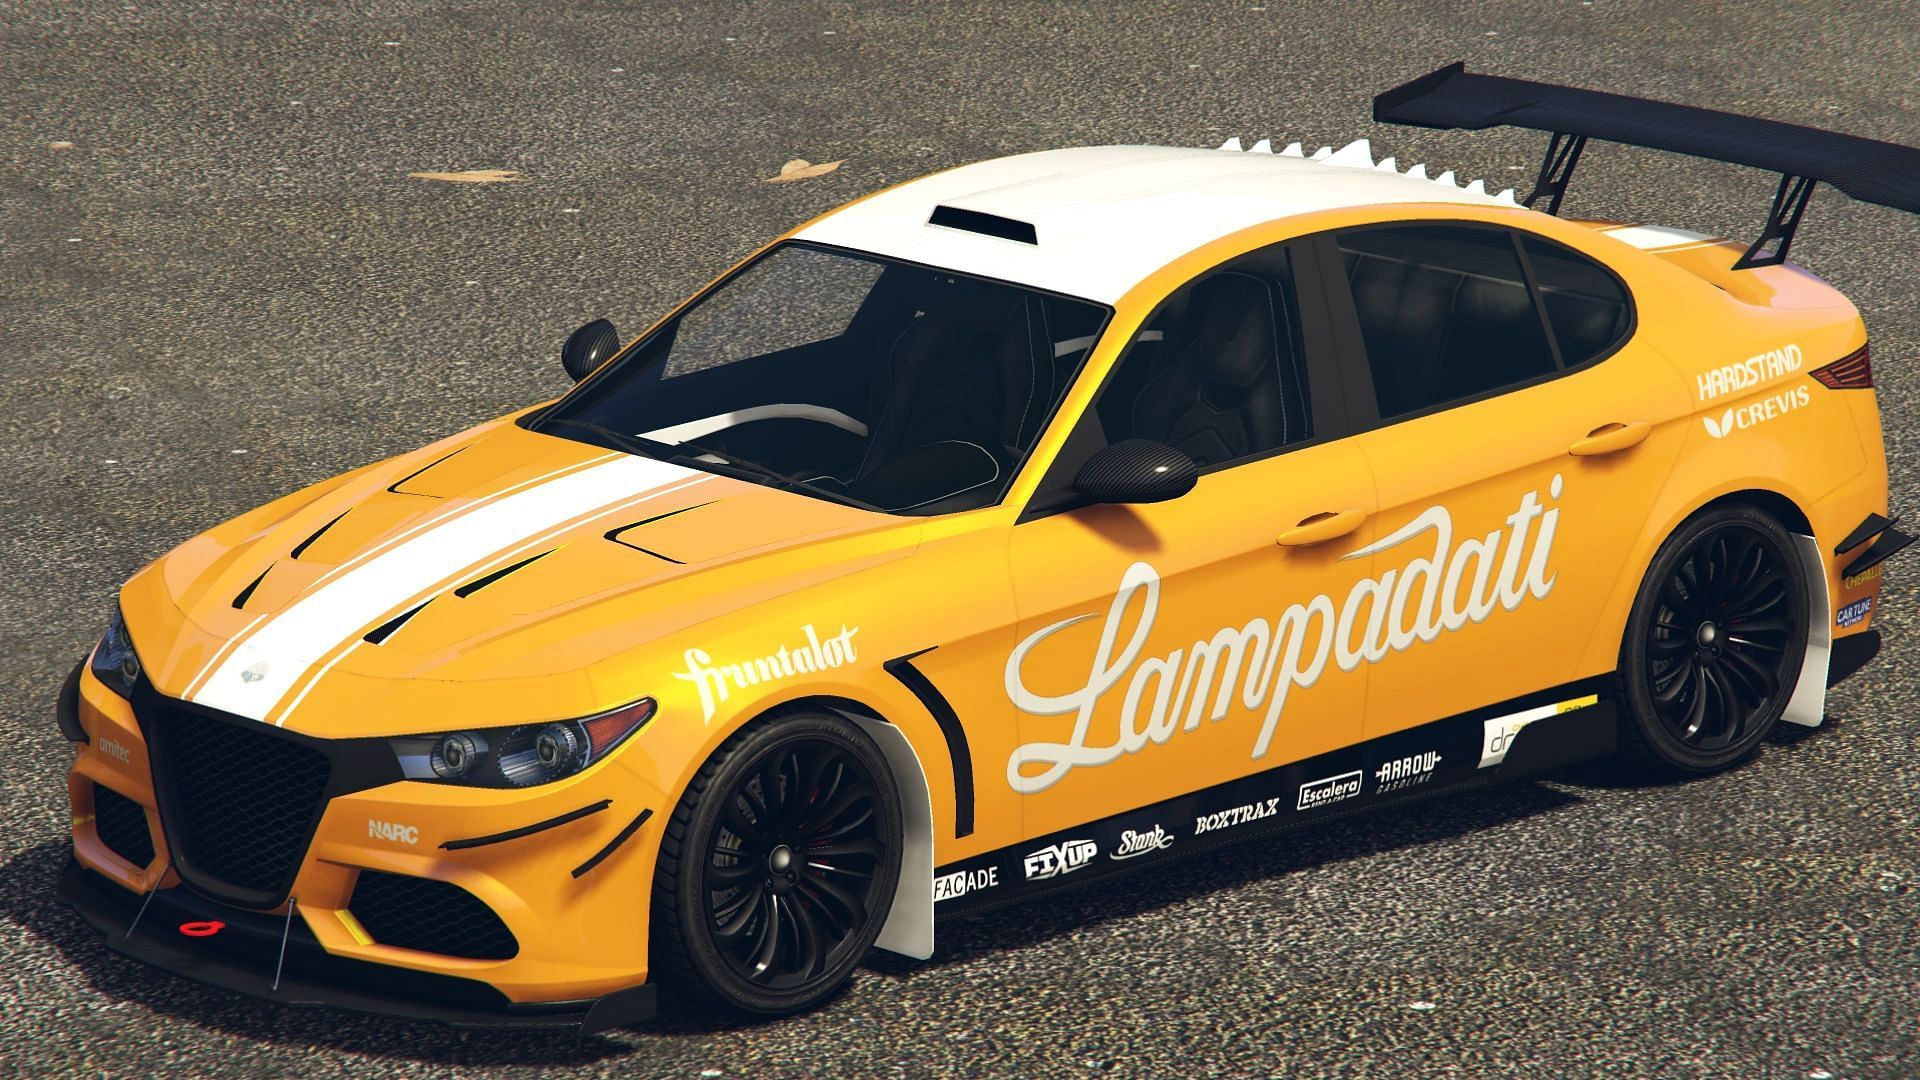 The Komoda with one of its liveries (Image via Noirlime4L/GTA Wiki || Rockstar Games)